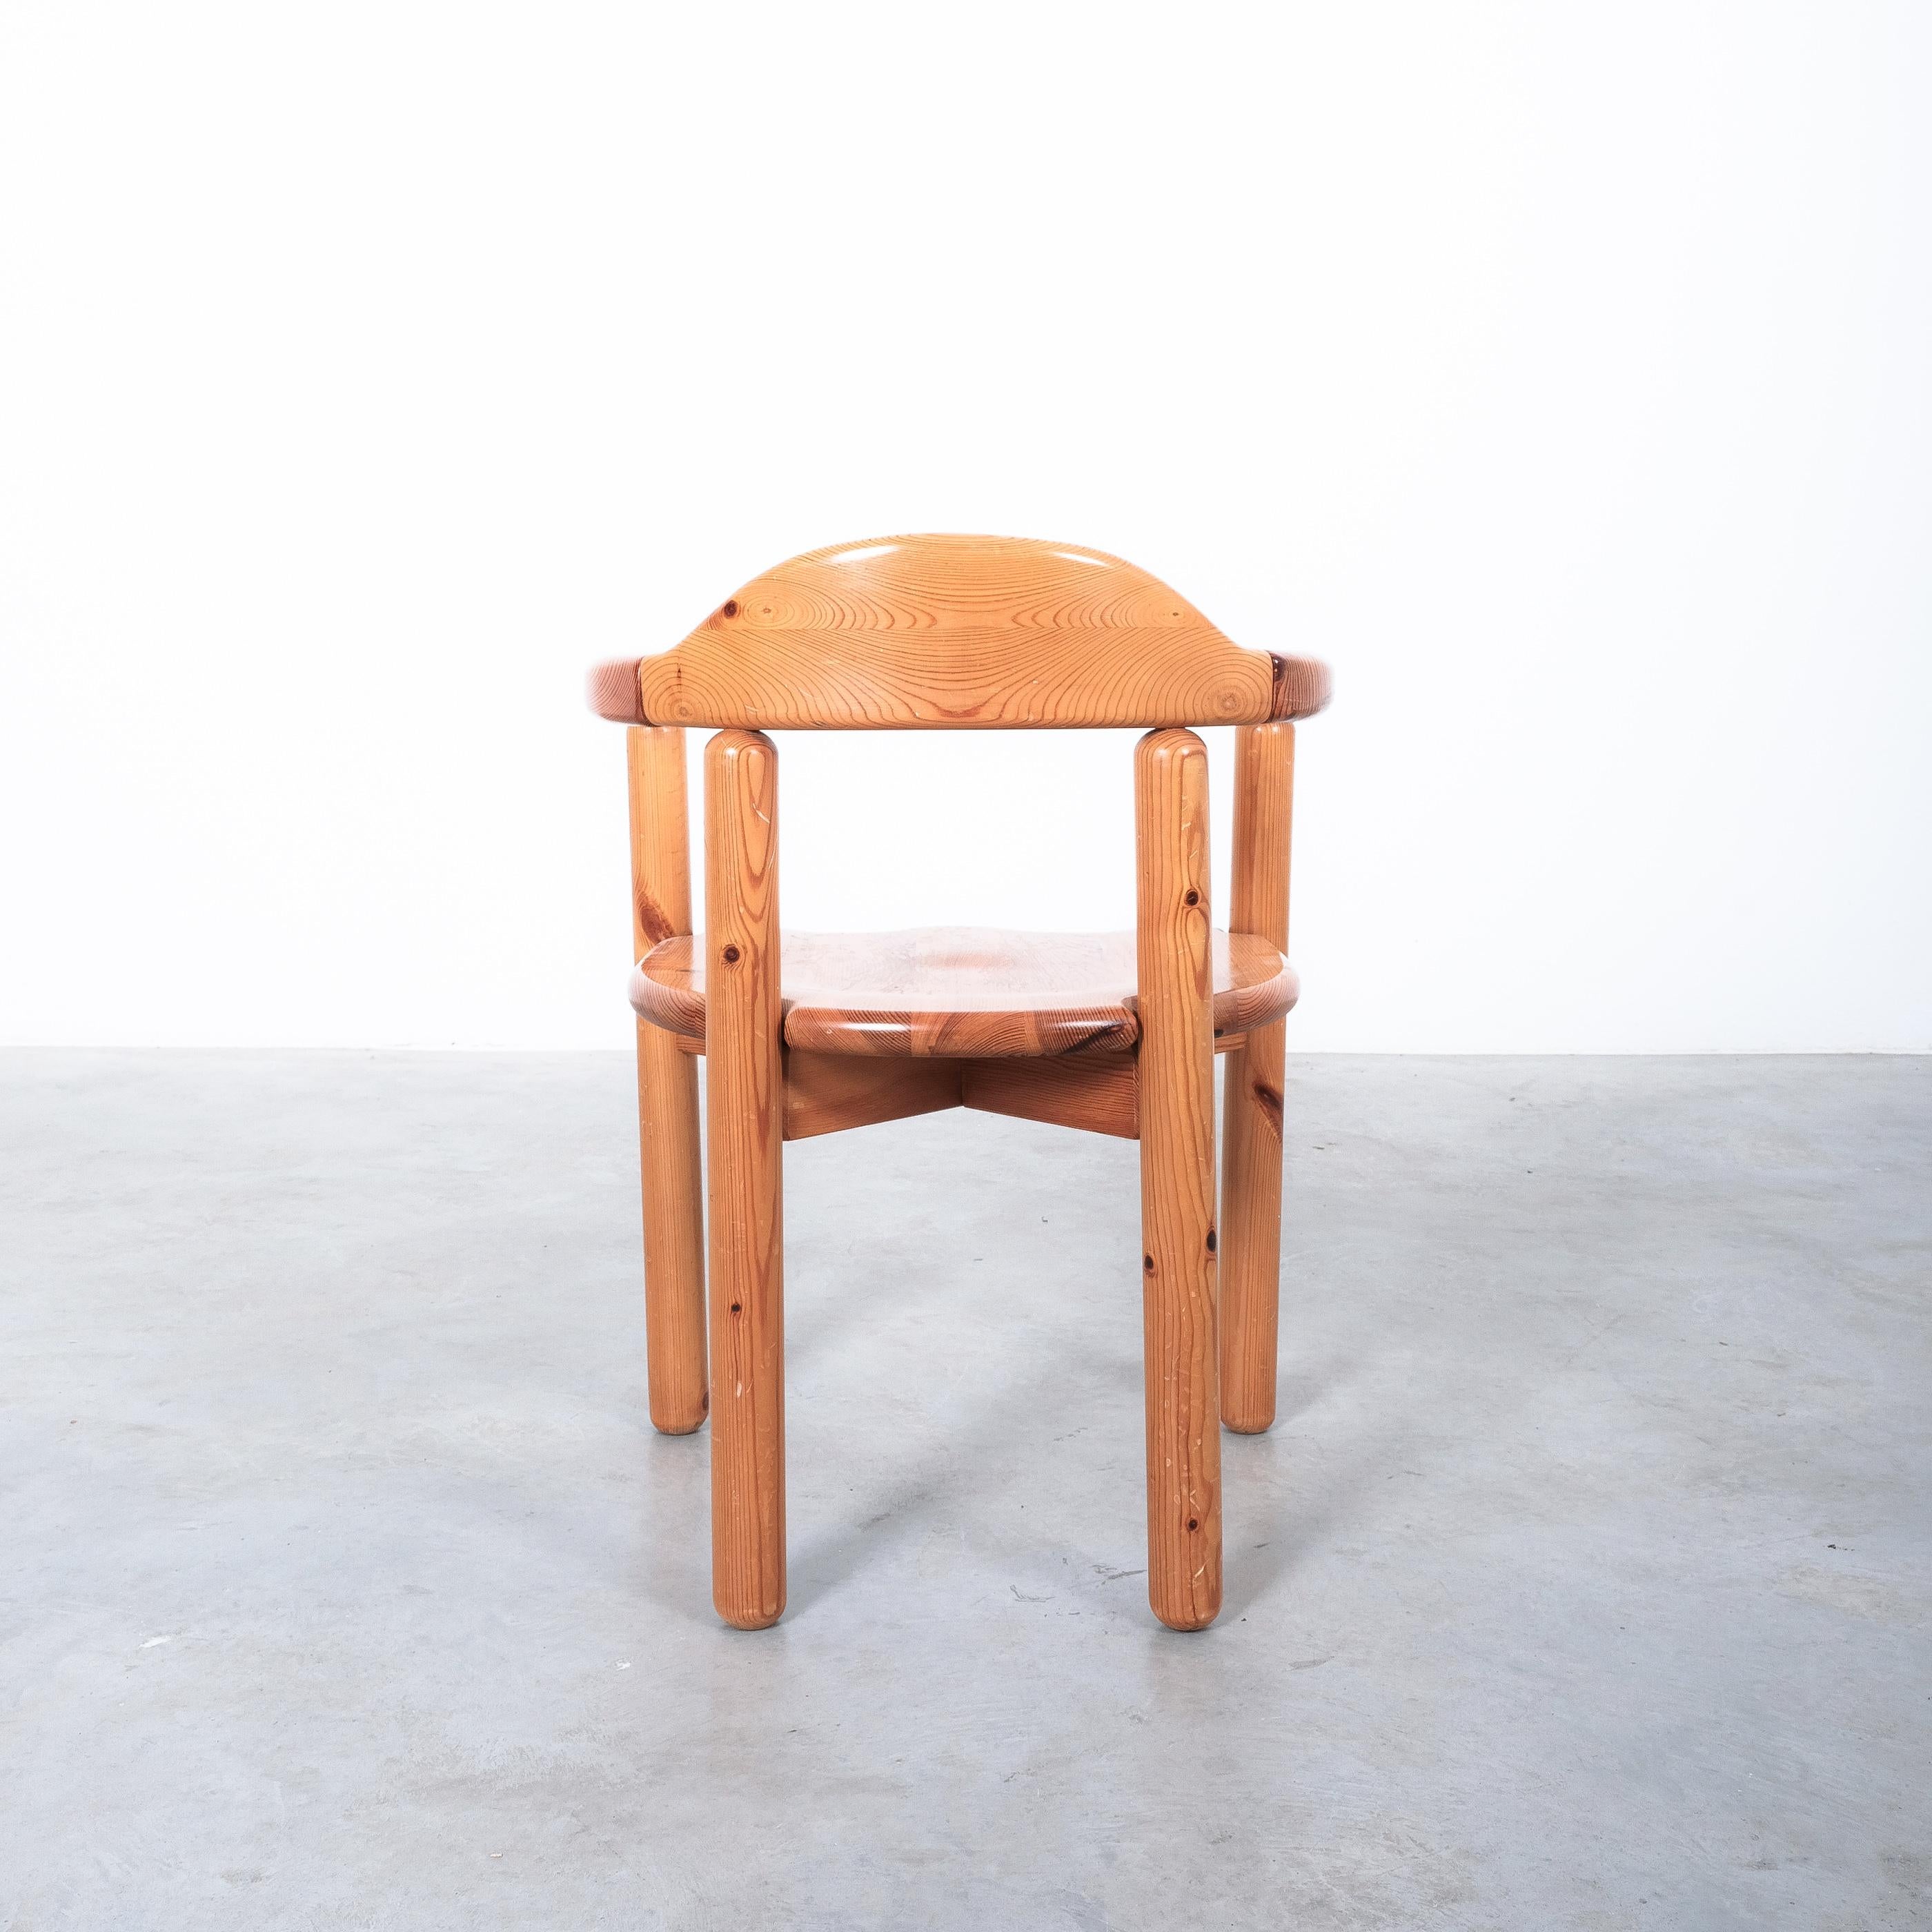 Rainer Daumiller Solid Pine Wood Dining Chairs '6' Danish Design, 1970 For Sale 5